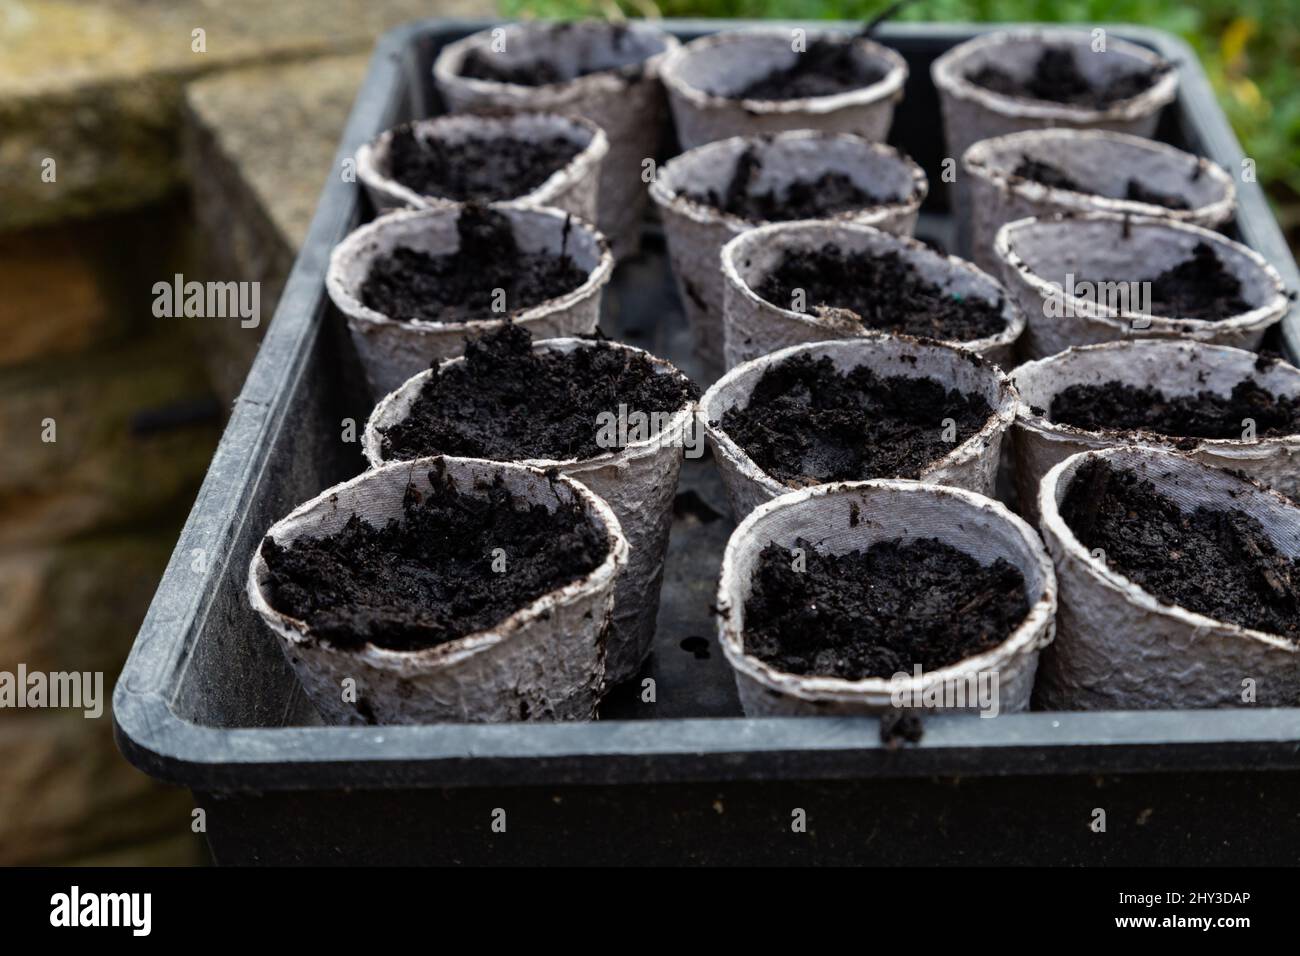 Fibre plant pots filled with compost ready for seed planting. Stock Photo